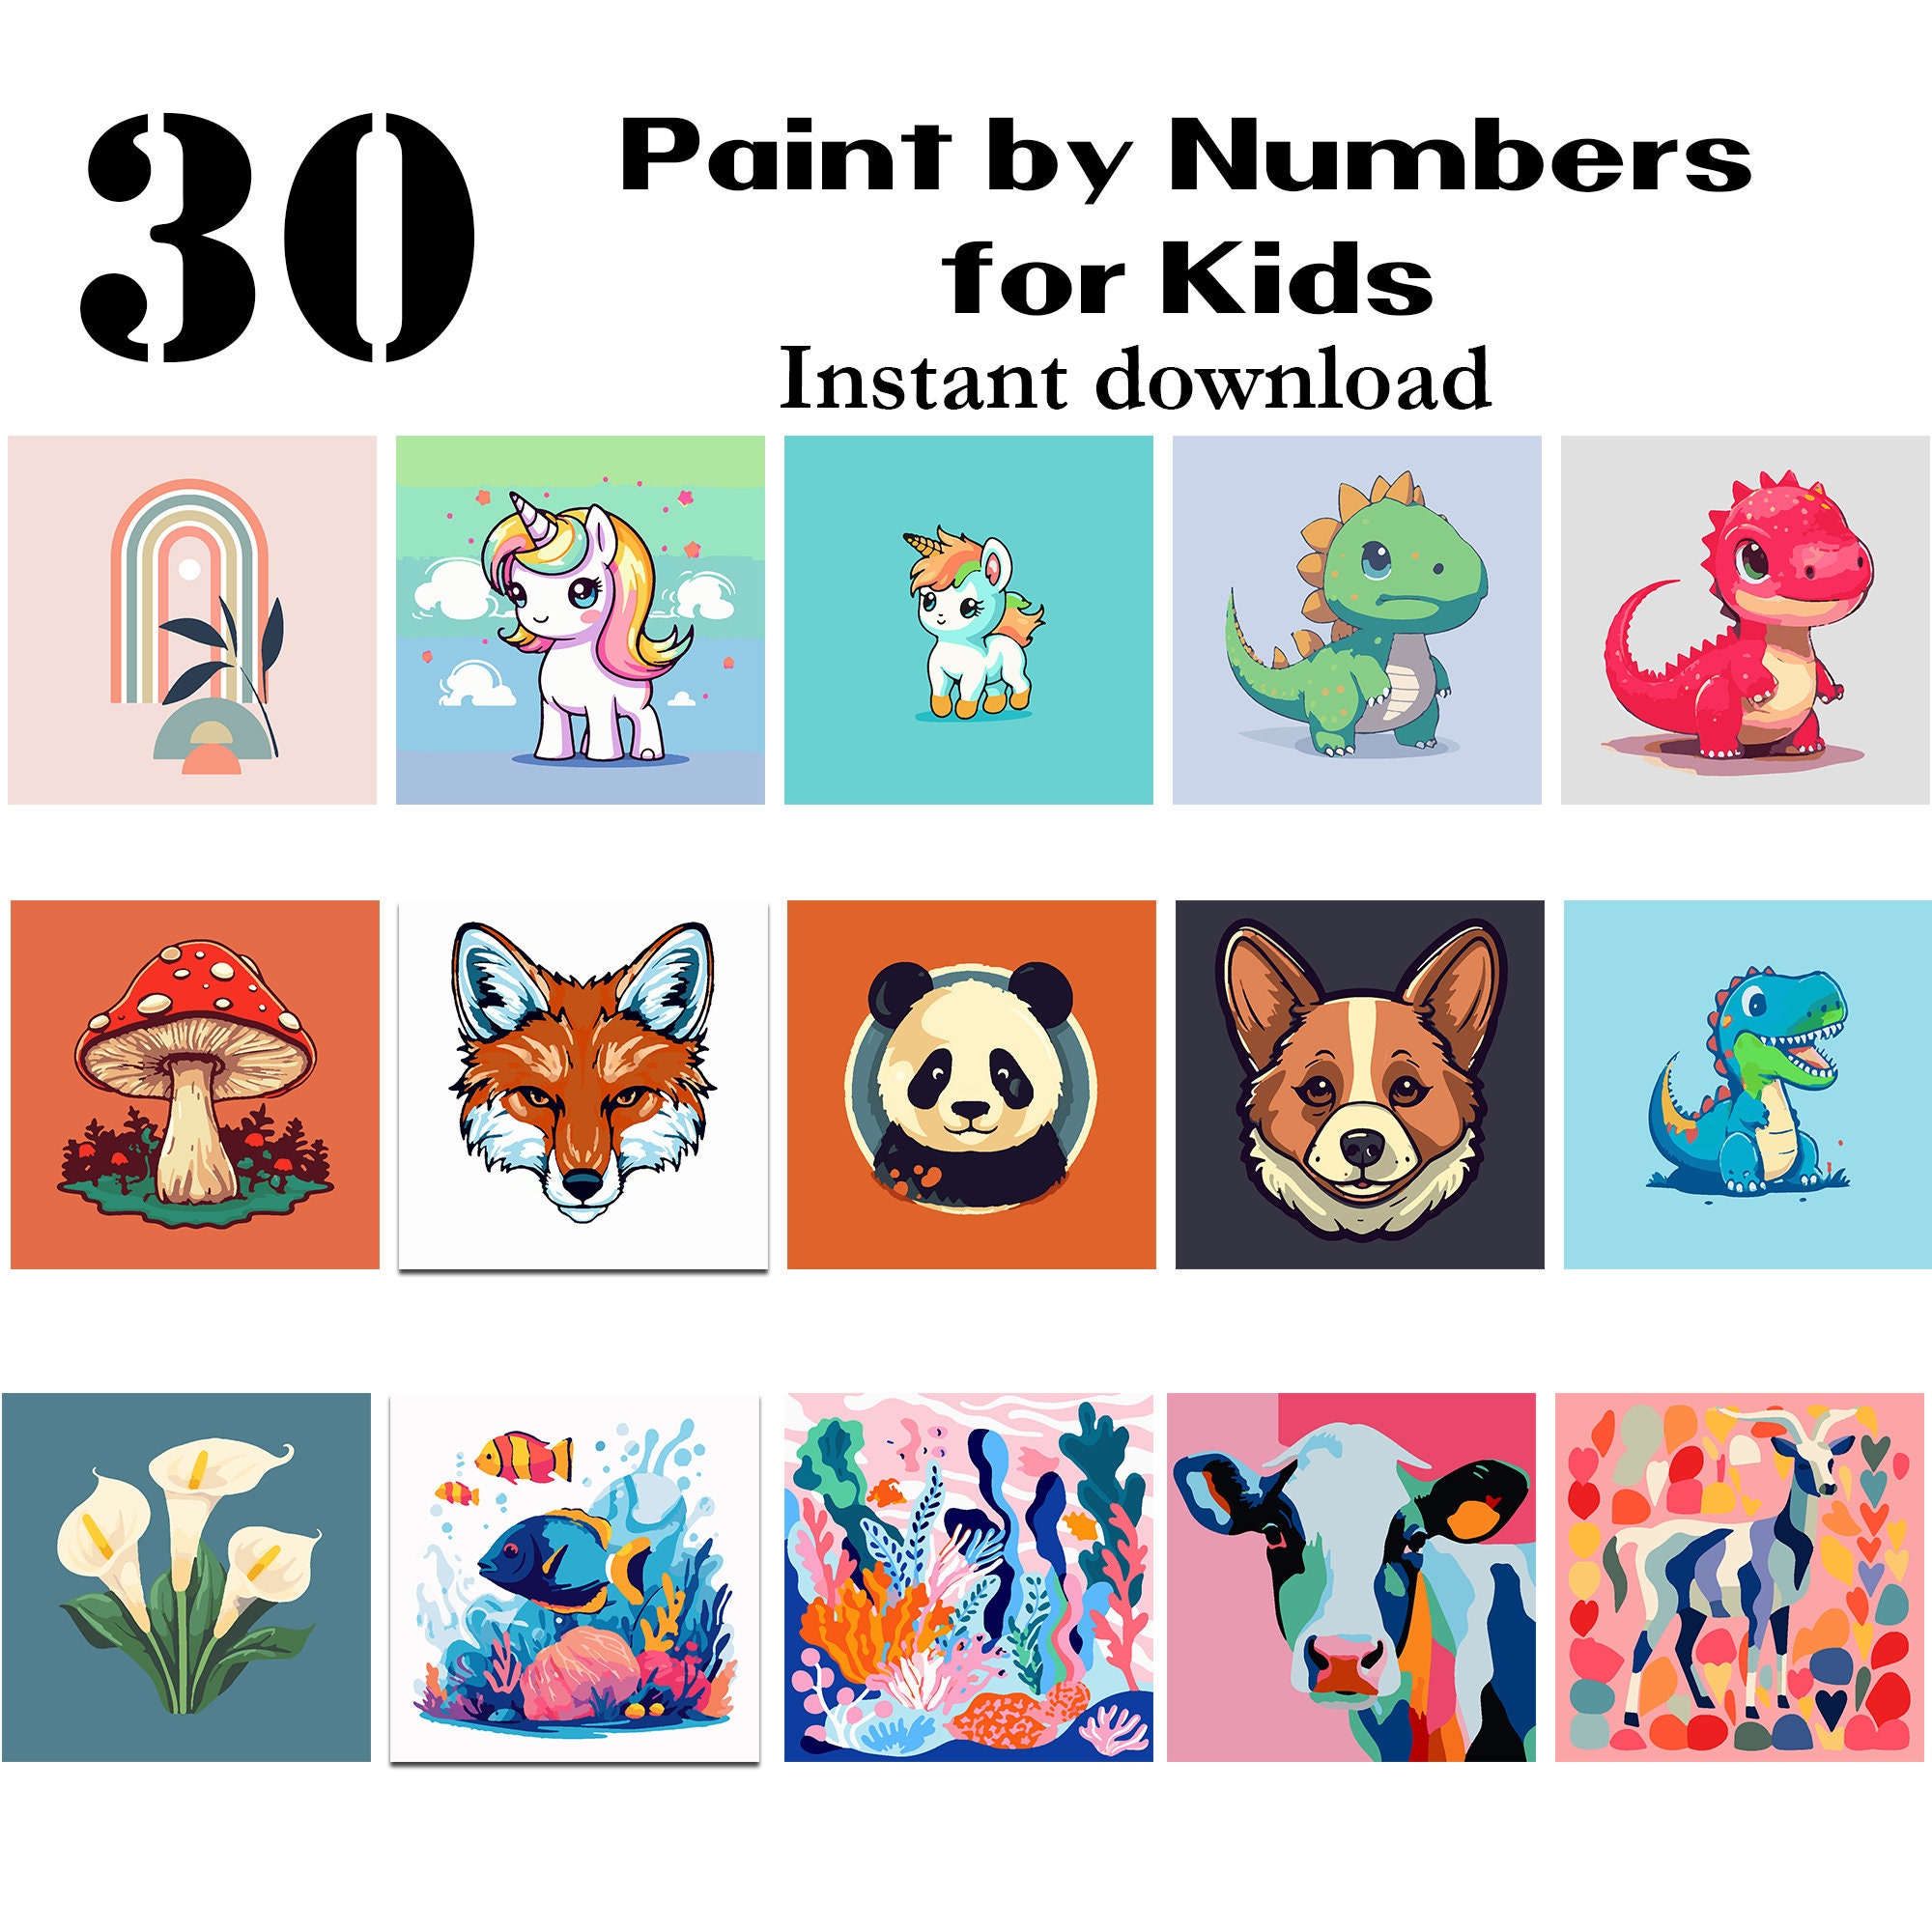 Pretty Jolly DIY Apricot Flower Paint by Numbers for Adults Beginner Oil Paint by Number Kit for Kids on Canvas with Brushes